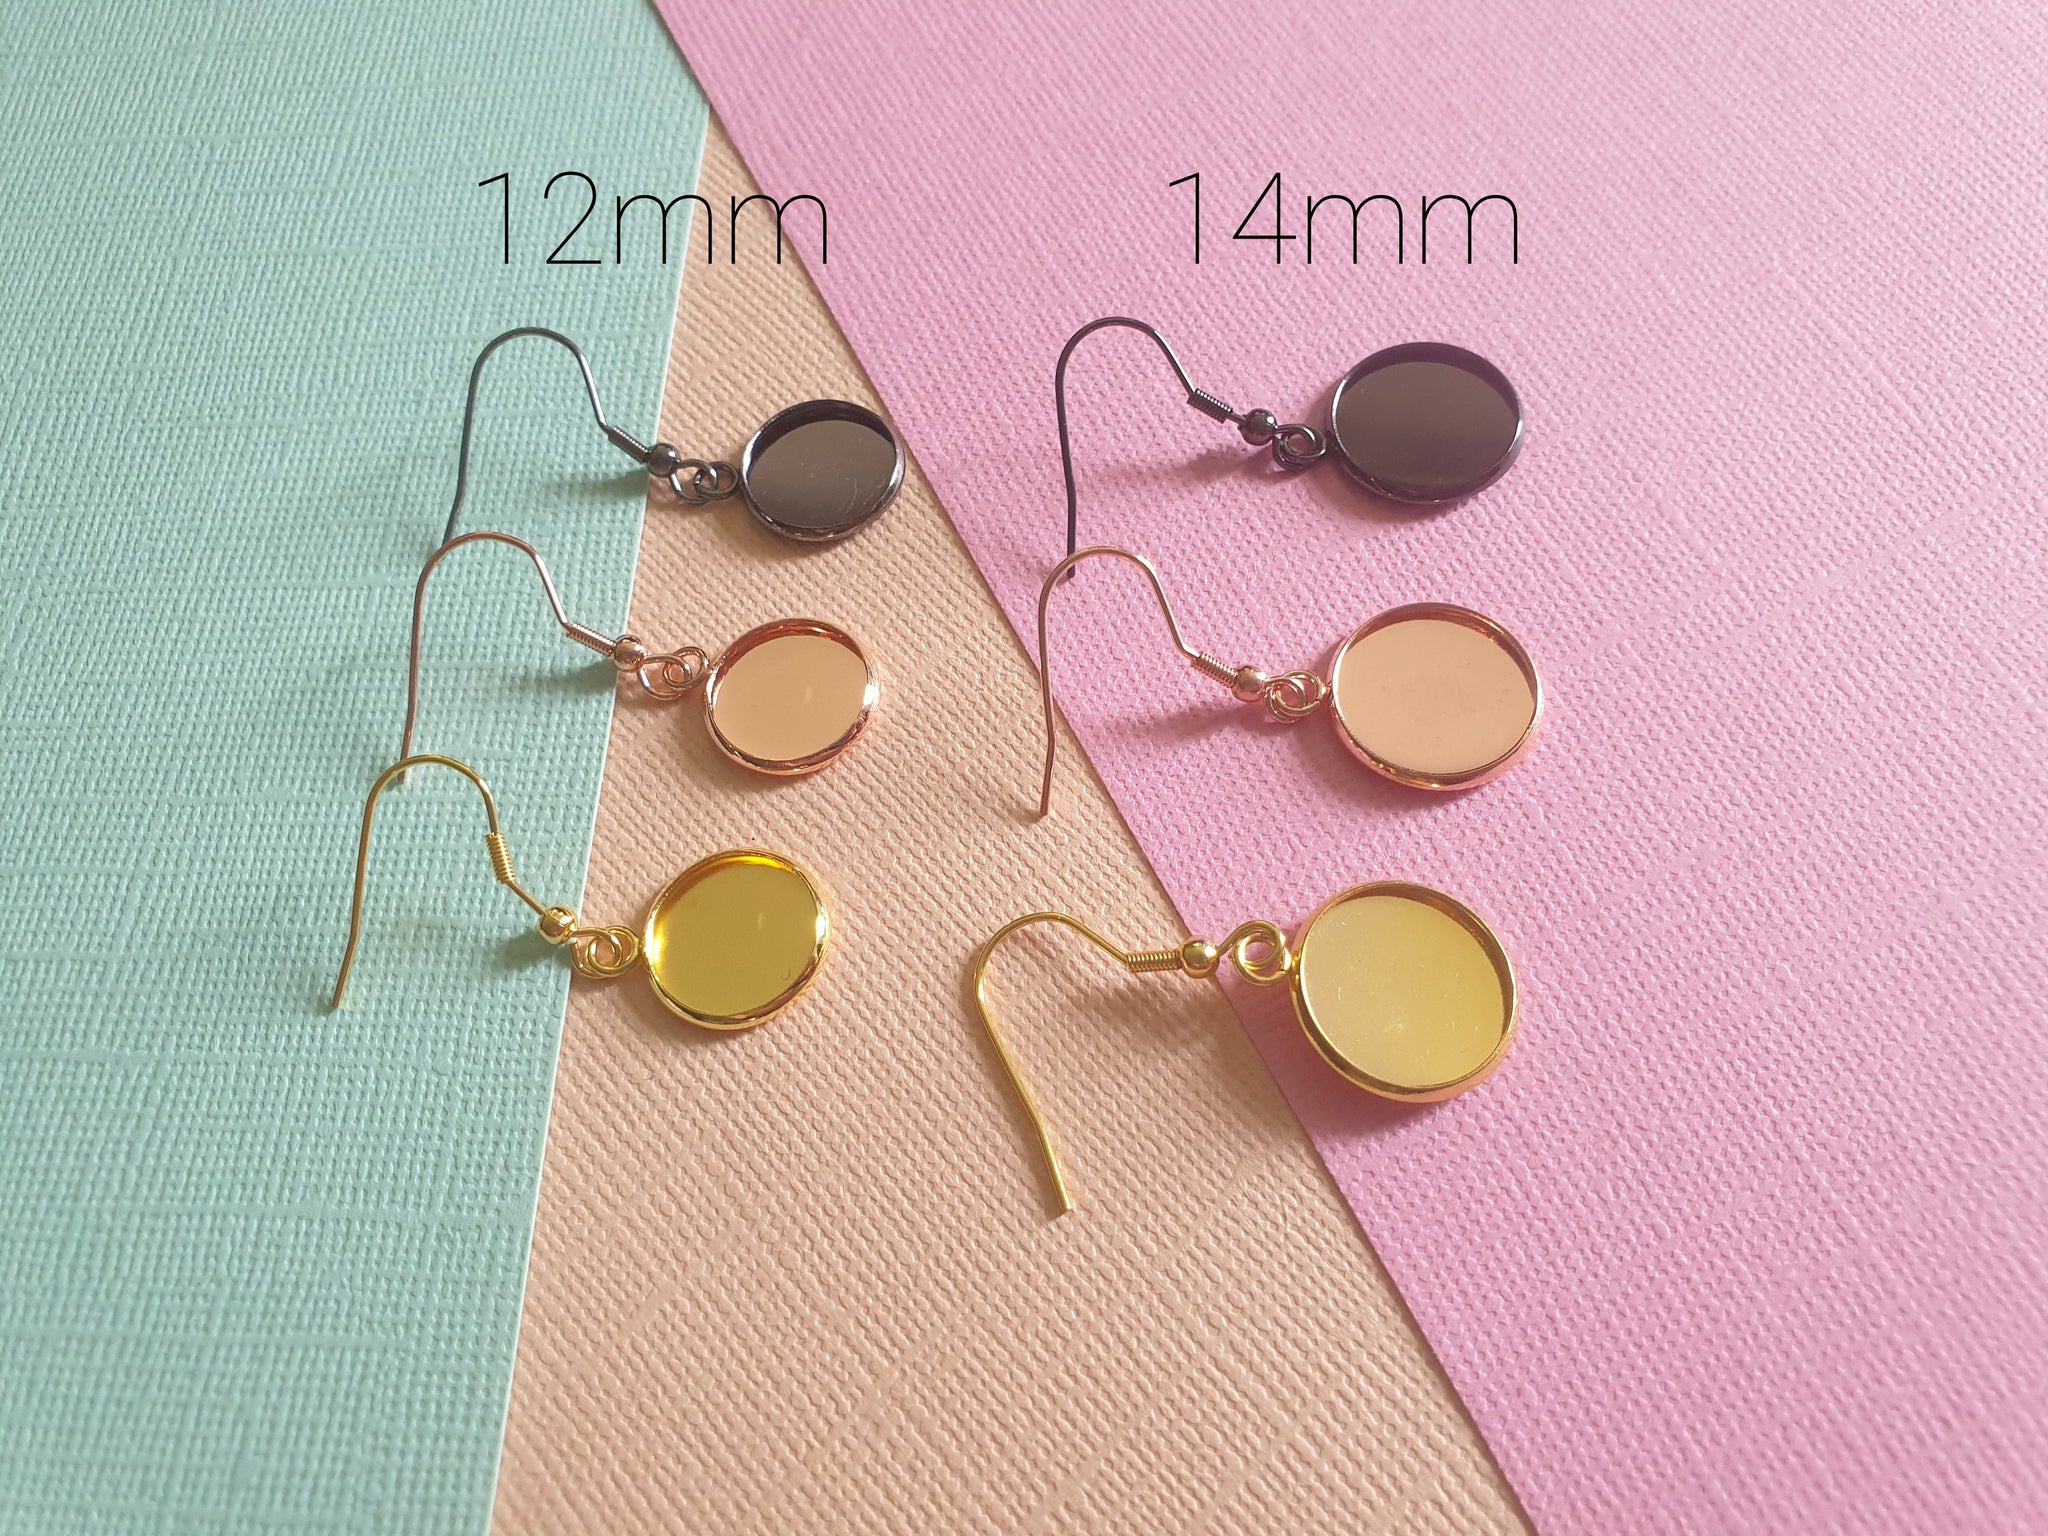 10pcs (5prs) 8/10/12/14mm Yellow gold, Rose Gold, Gun Black, Electroplated Stainless Steel, Earring Hooks, Cabochon Blank Bezel Base